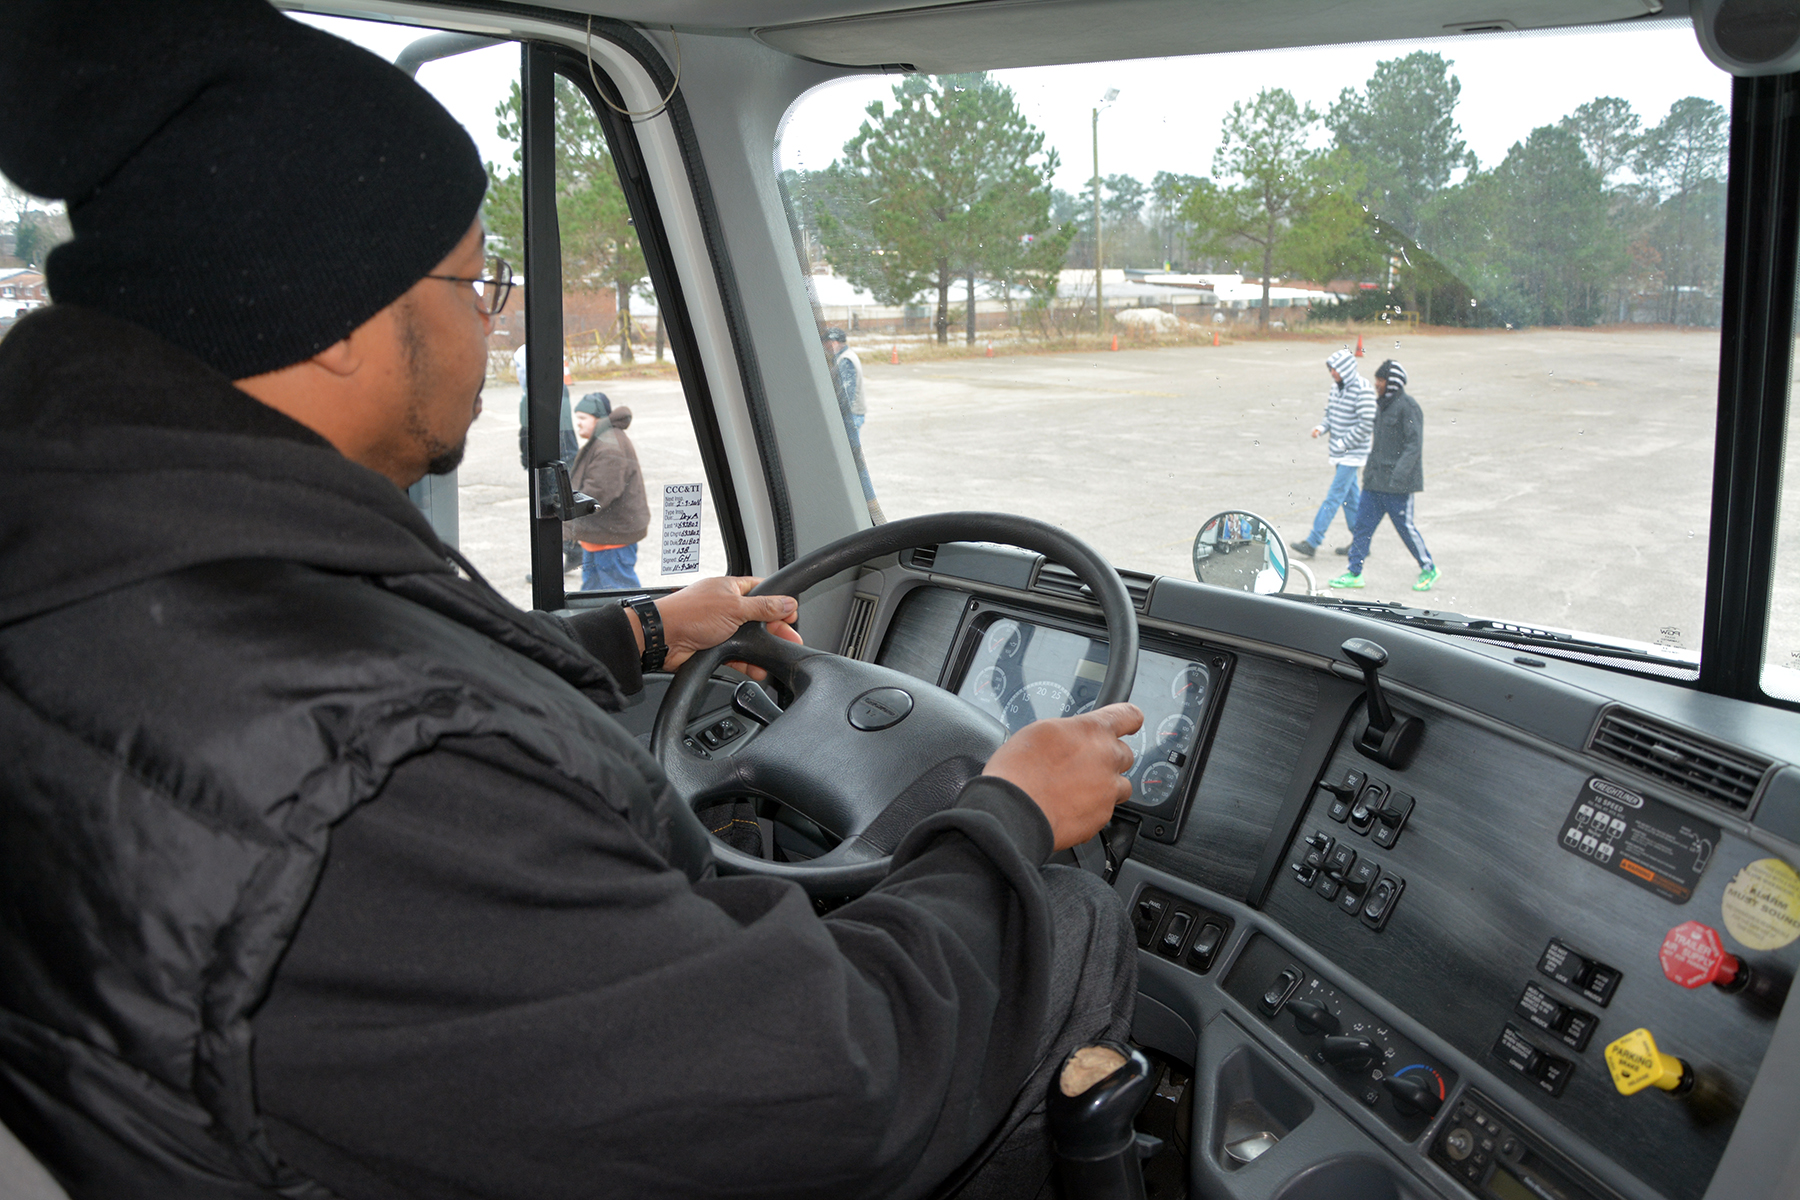 Getting the feel of being behind the wheel of an 18-wheeler, a student in the truck driver training class at Richmond Community College takes what he learned in the classroom to the hands-on practice in the driver seat.  RichmondCC is now accepting students into the fall truck driver training program that will begin Sept. 12.